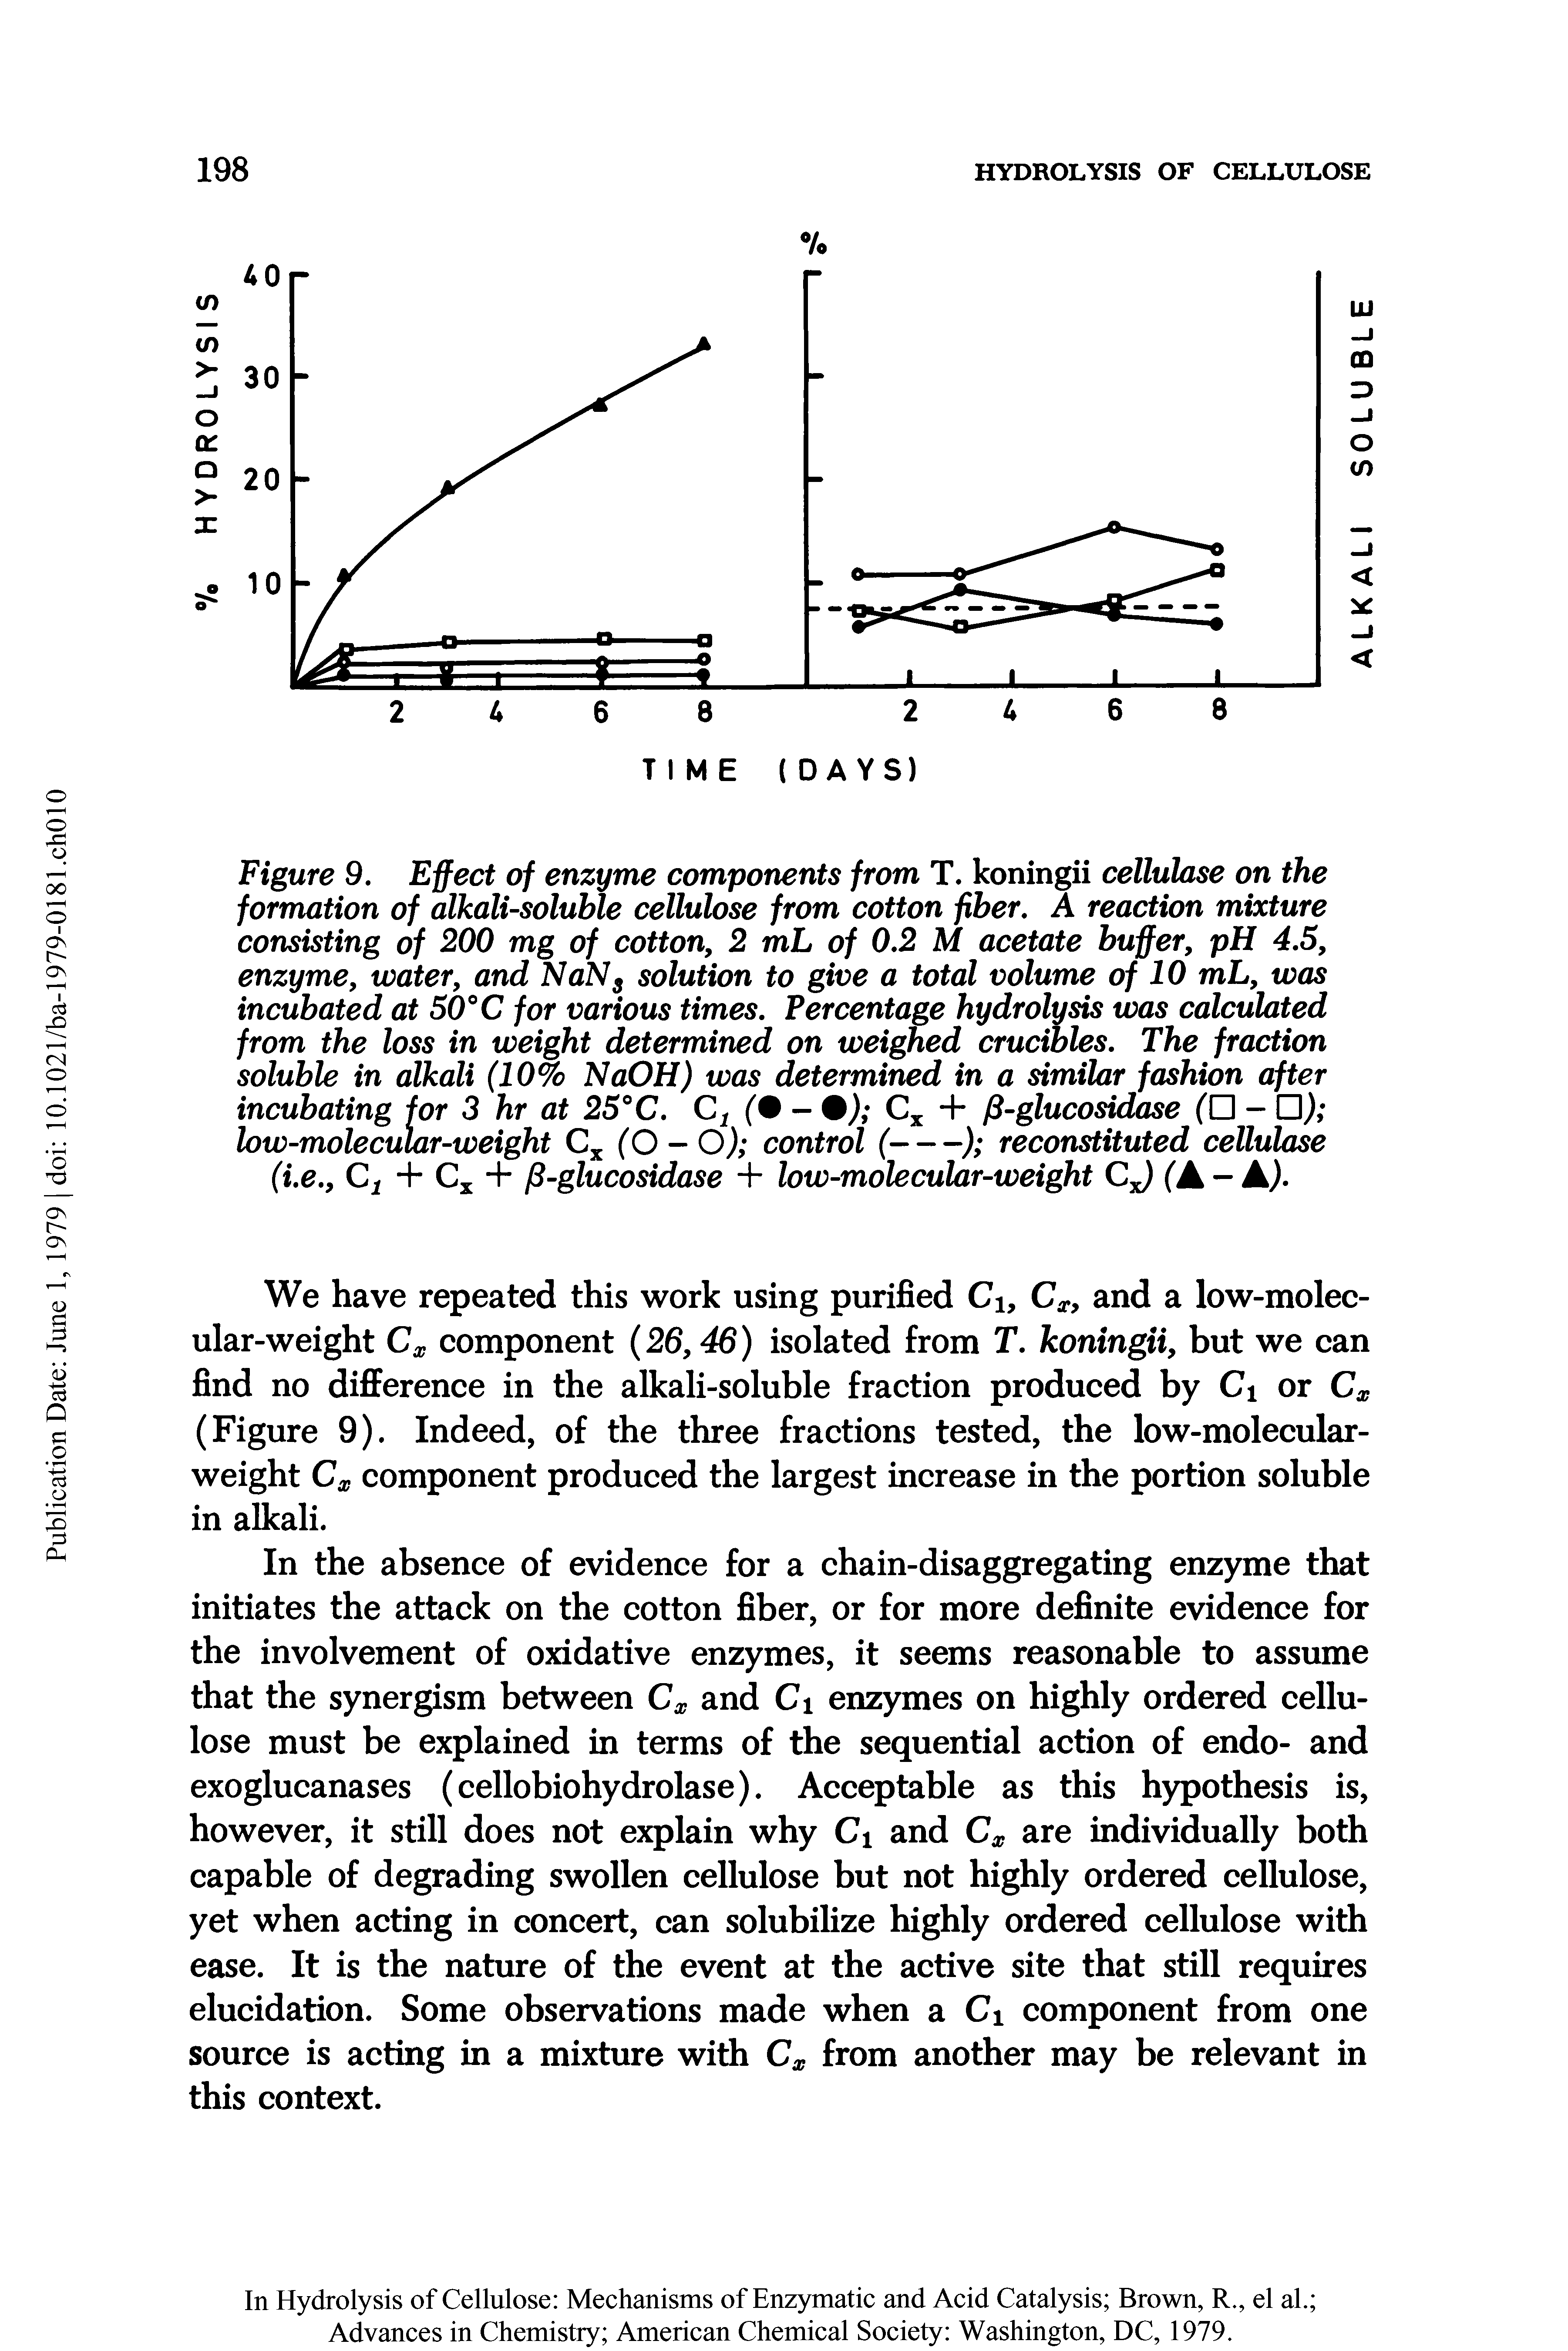 Figure 9. Effect of enzyme components from T. koningii cellulose on the formation of alkali-soluble cellulose from cotton fiber. A reaction mixture consisting of 200 mg of cotton, 2 mL of 0.2 M acetate buffer, pH 4.5, enzyme, water, and NaNs solution to give a total volume of 10 mL, was incubated at 50°C for various times. Percentage hydrolysis was calculated from the loss in weight determined on weighed crucibles. The fraction soluble in alkali (10% NaOH) was determined in a similar fashion after incubating for 3 hr at 25°C. Ct ( - 0) Cx + /3-glucosidase ( - ) ...